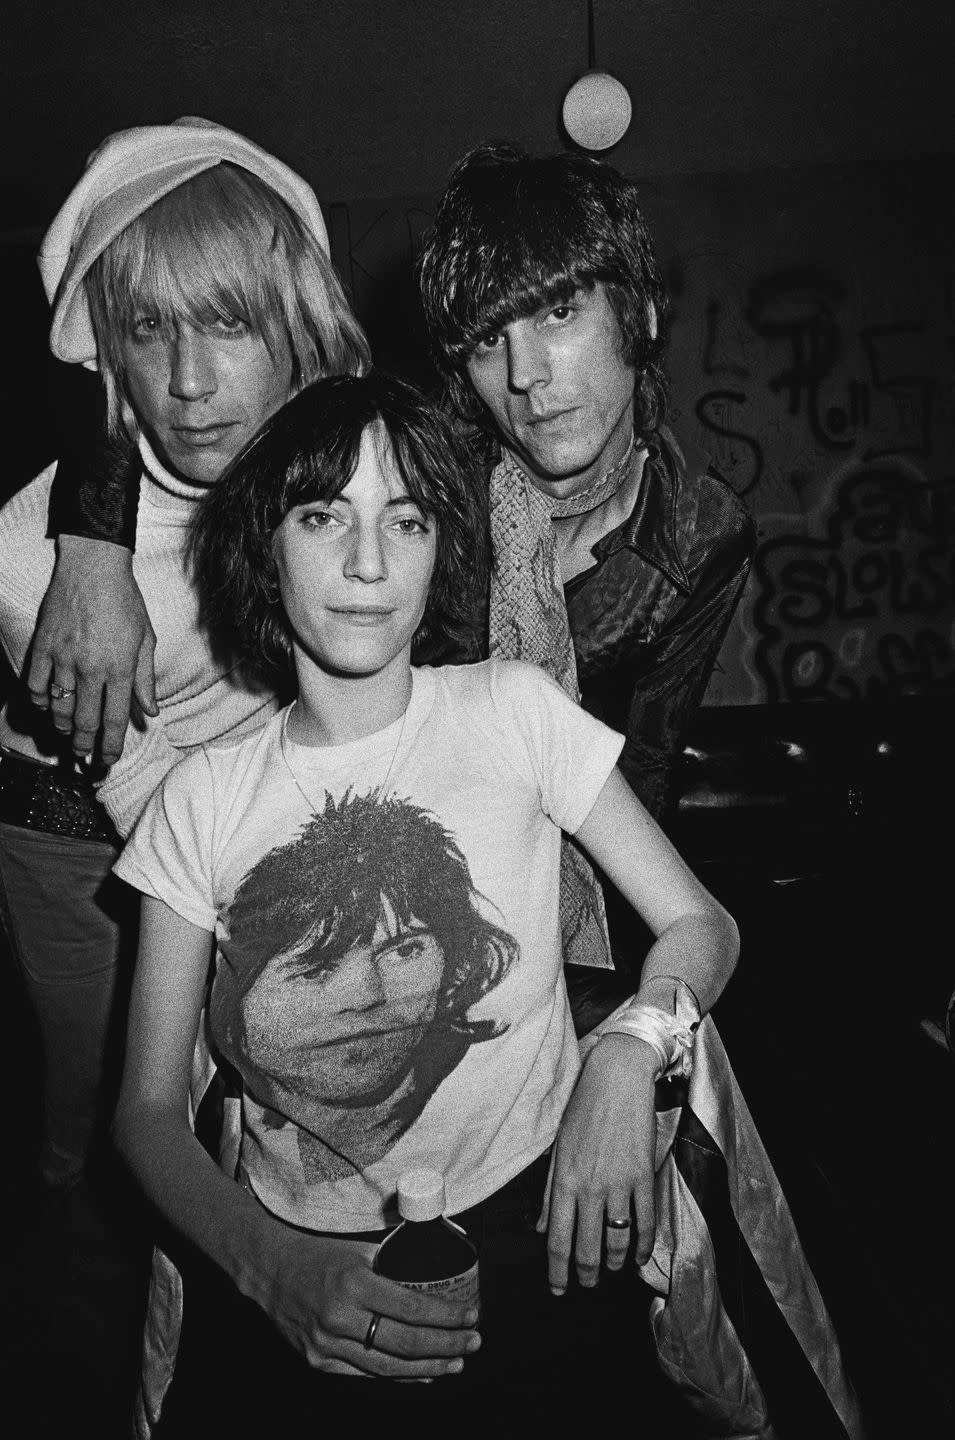 <p>Patti Smith poses with Iggy Pop and James Williamson of The Stooges in November 1974 backstage at the Whisky a Go Go in Los Angeles California.</p>